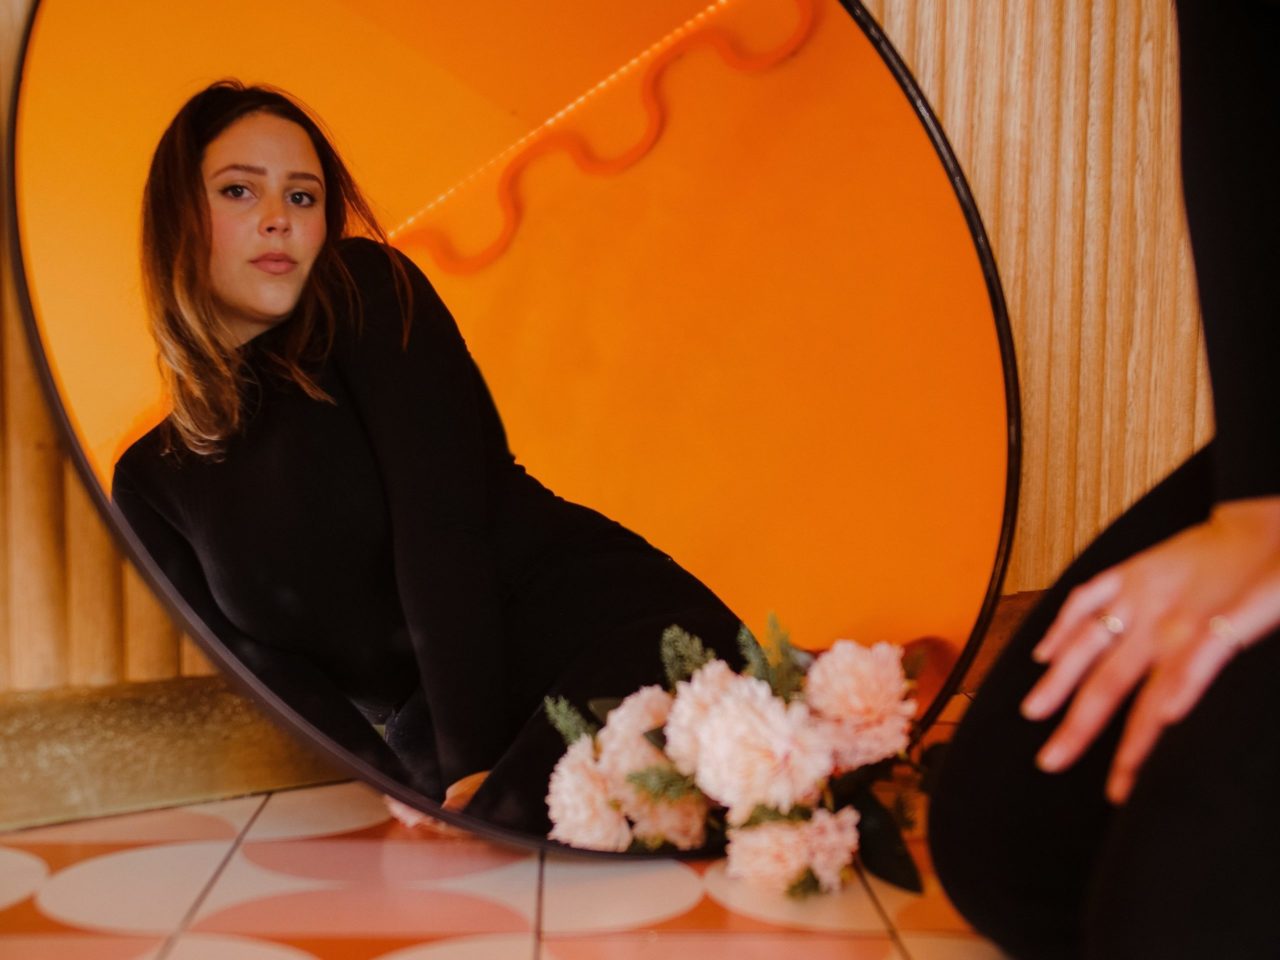 SHANNEN JAMES | WATCH THE VIDEO FOR NEW SINGLE ‘ARROWS’